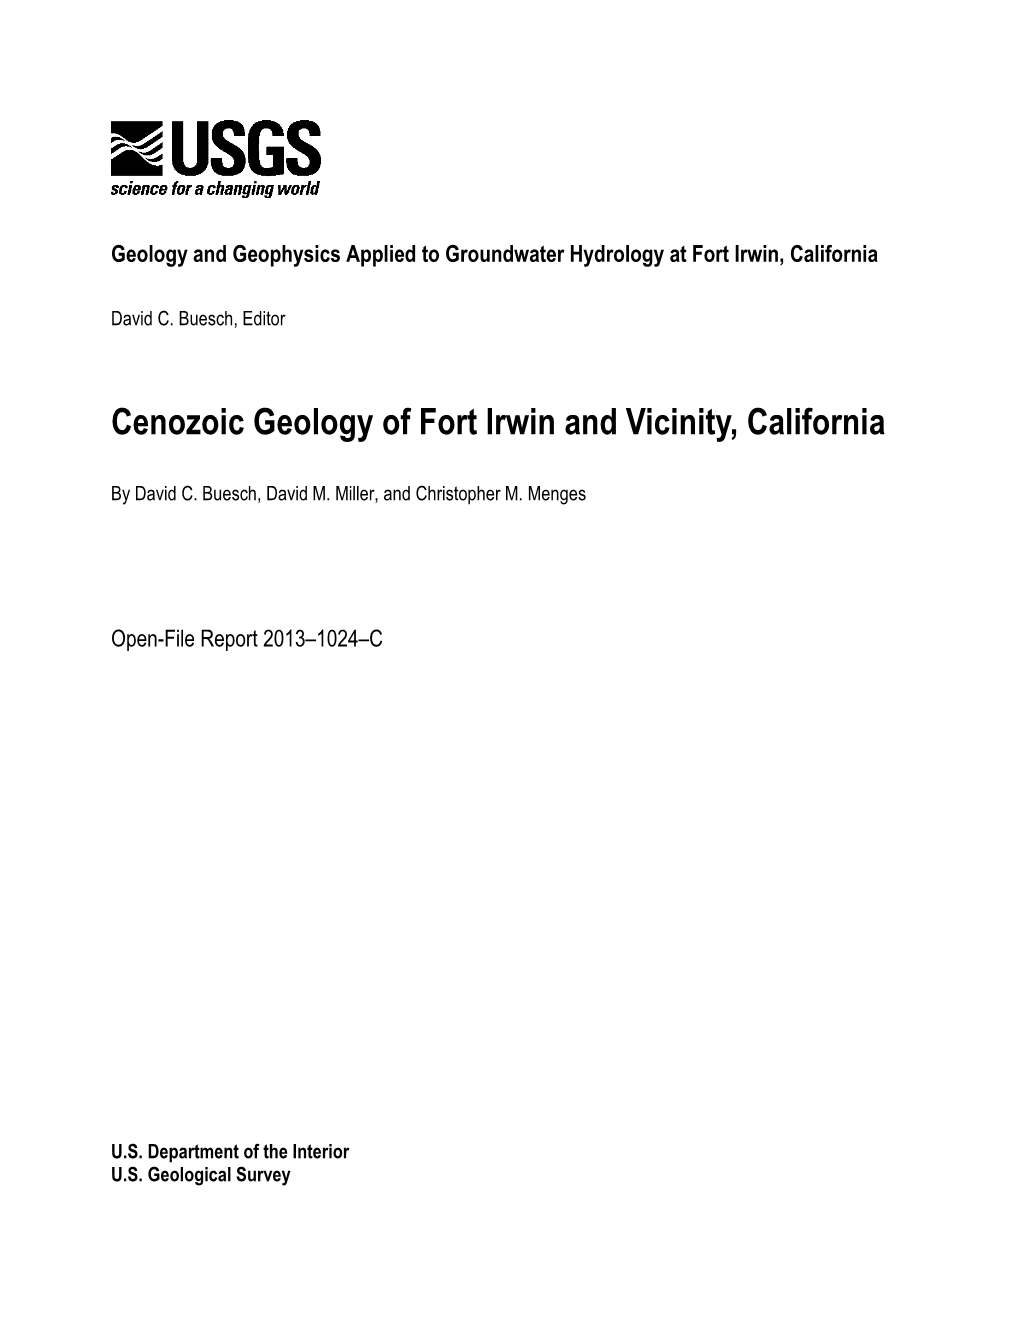 OFR 2013-1024C: Cenozoic Geology of Fort Irwin and Vicinity, California